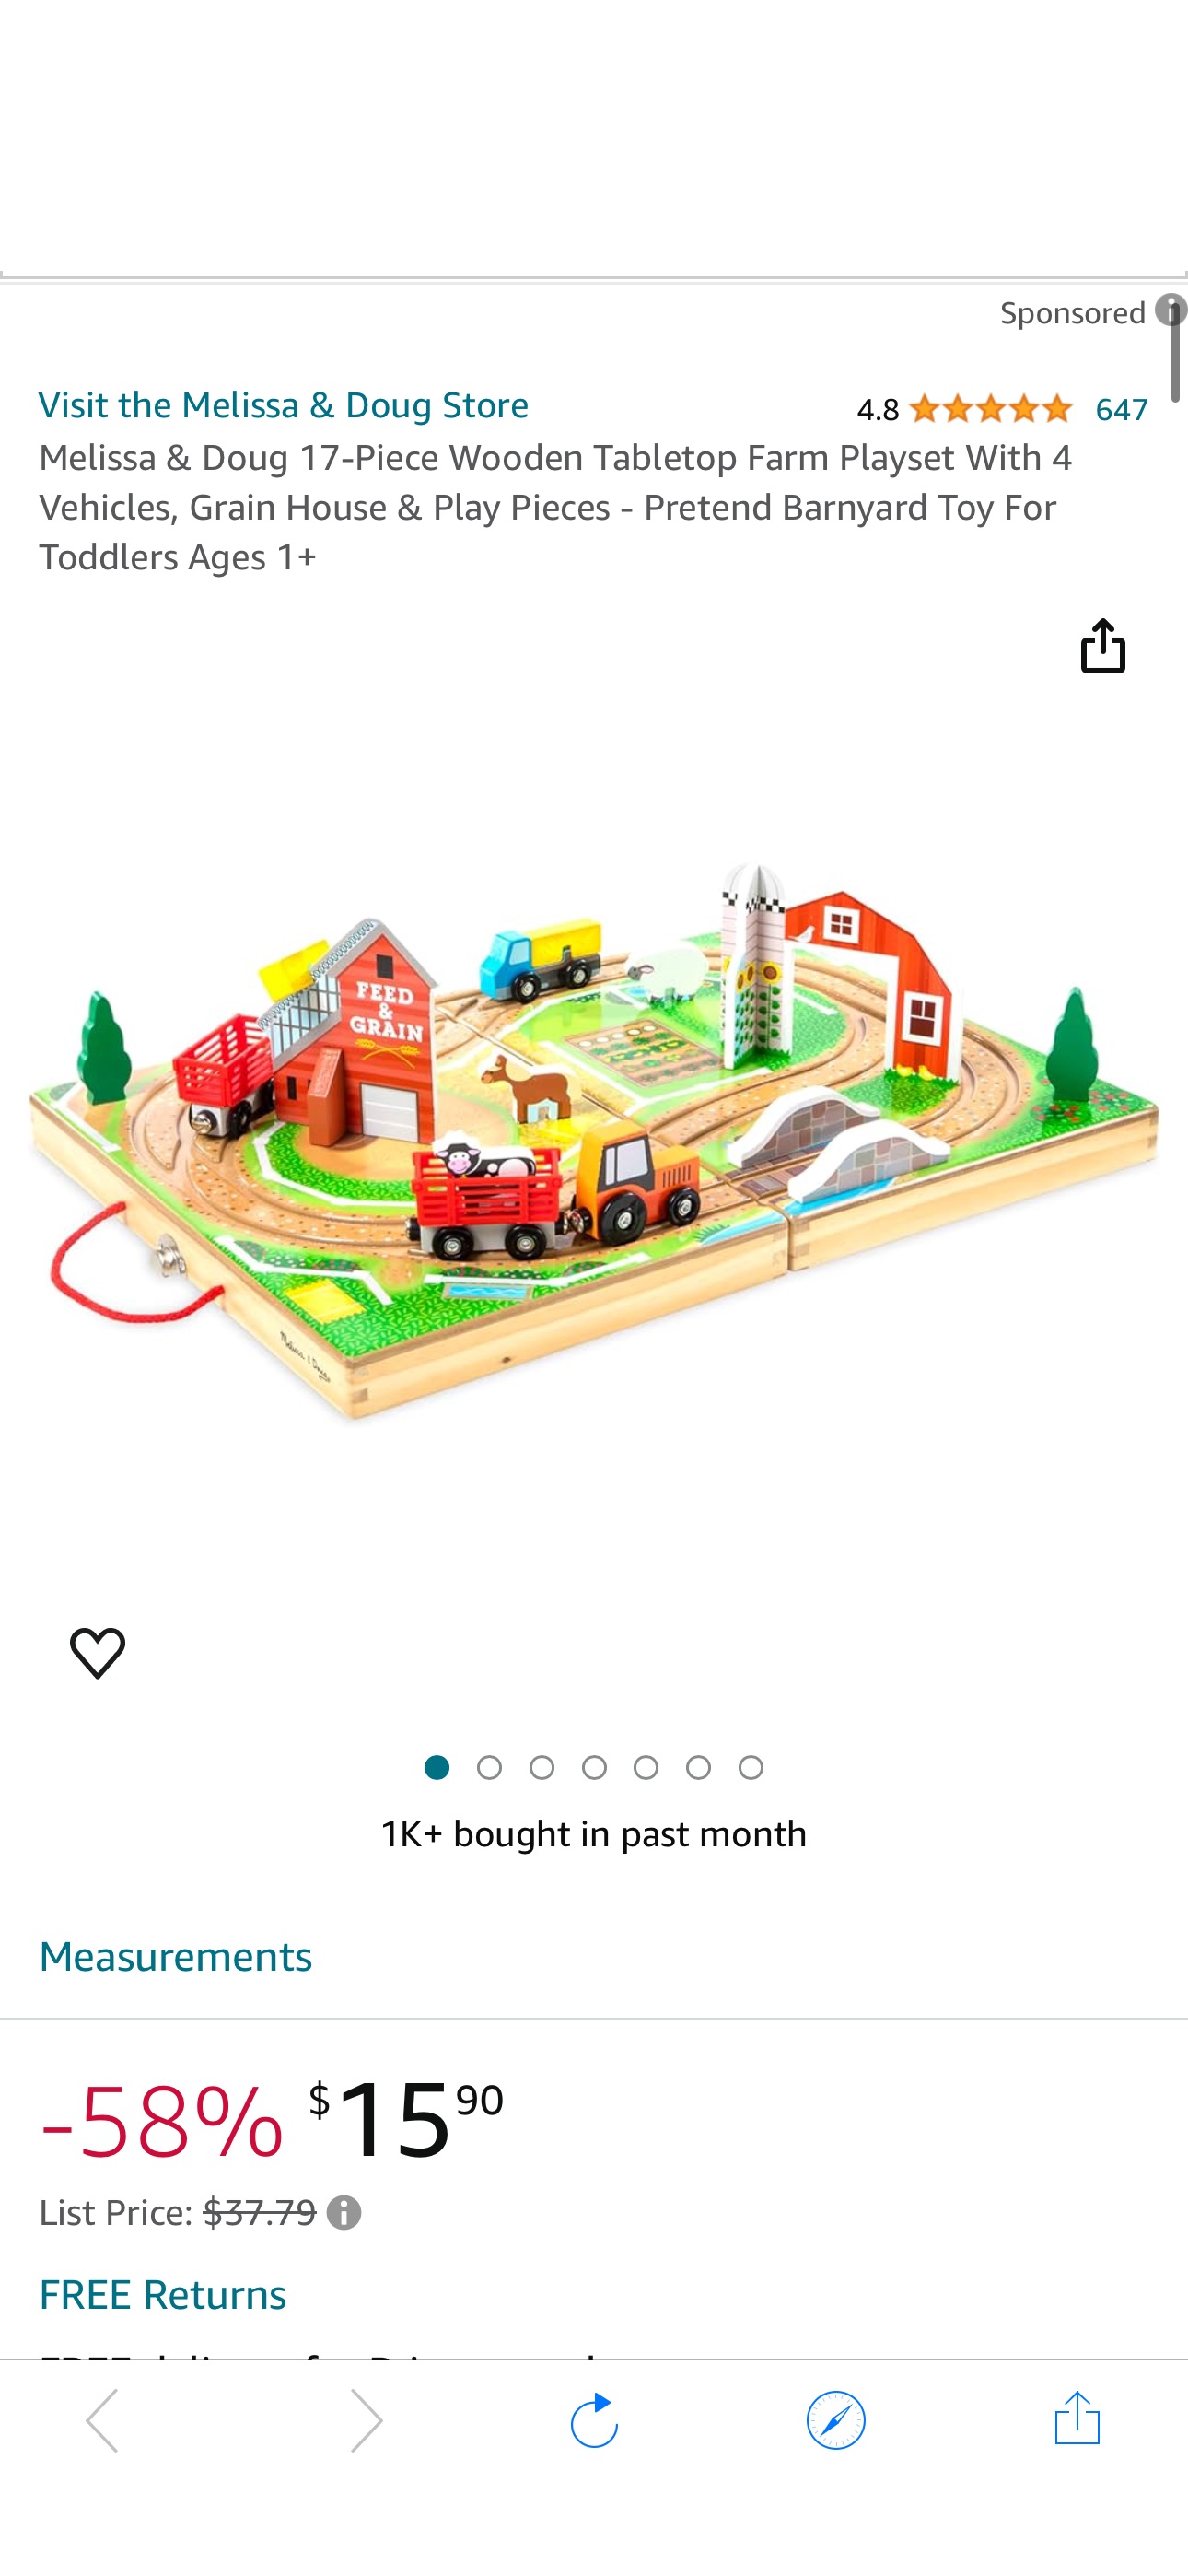 Amazon.com: Melissa & Doug 17-Piece Wooden Tabletop Farm Playset With 4 Vehicles, Grain House & Play Pieces - Pretend Barnyard Toy For Toddlers Ages 1+ : Toys & Games